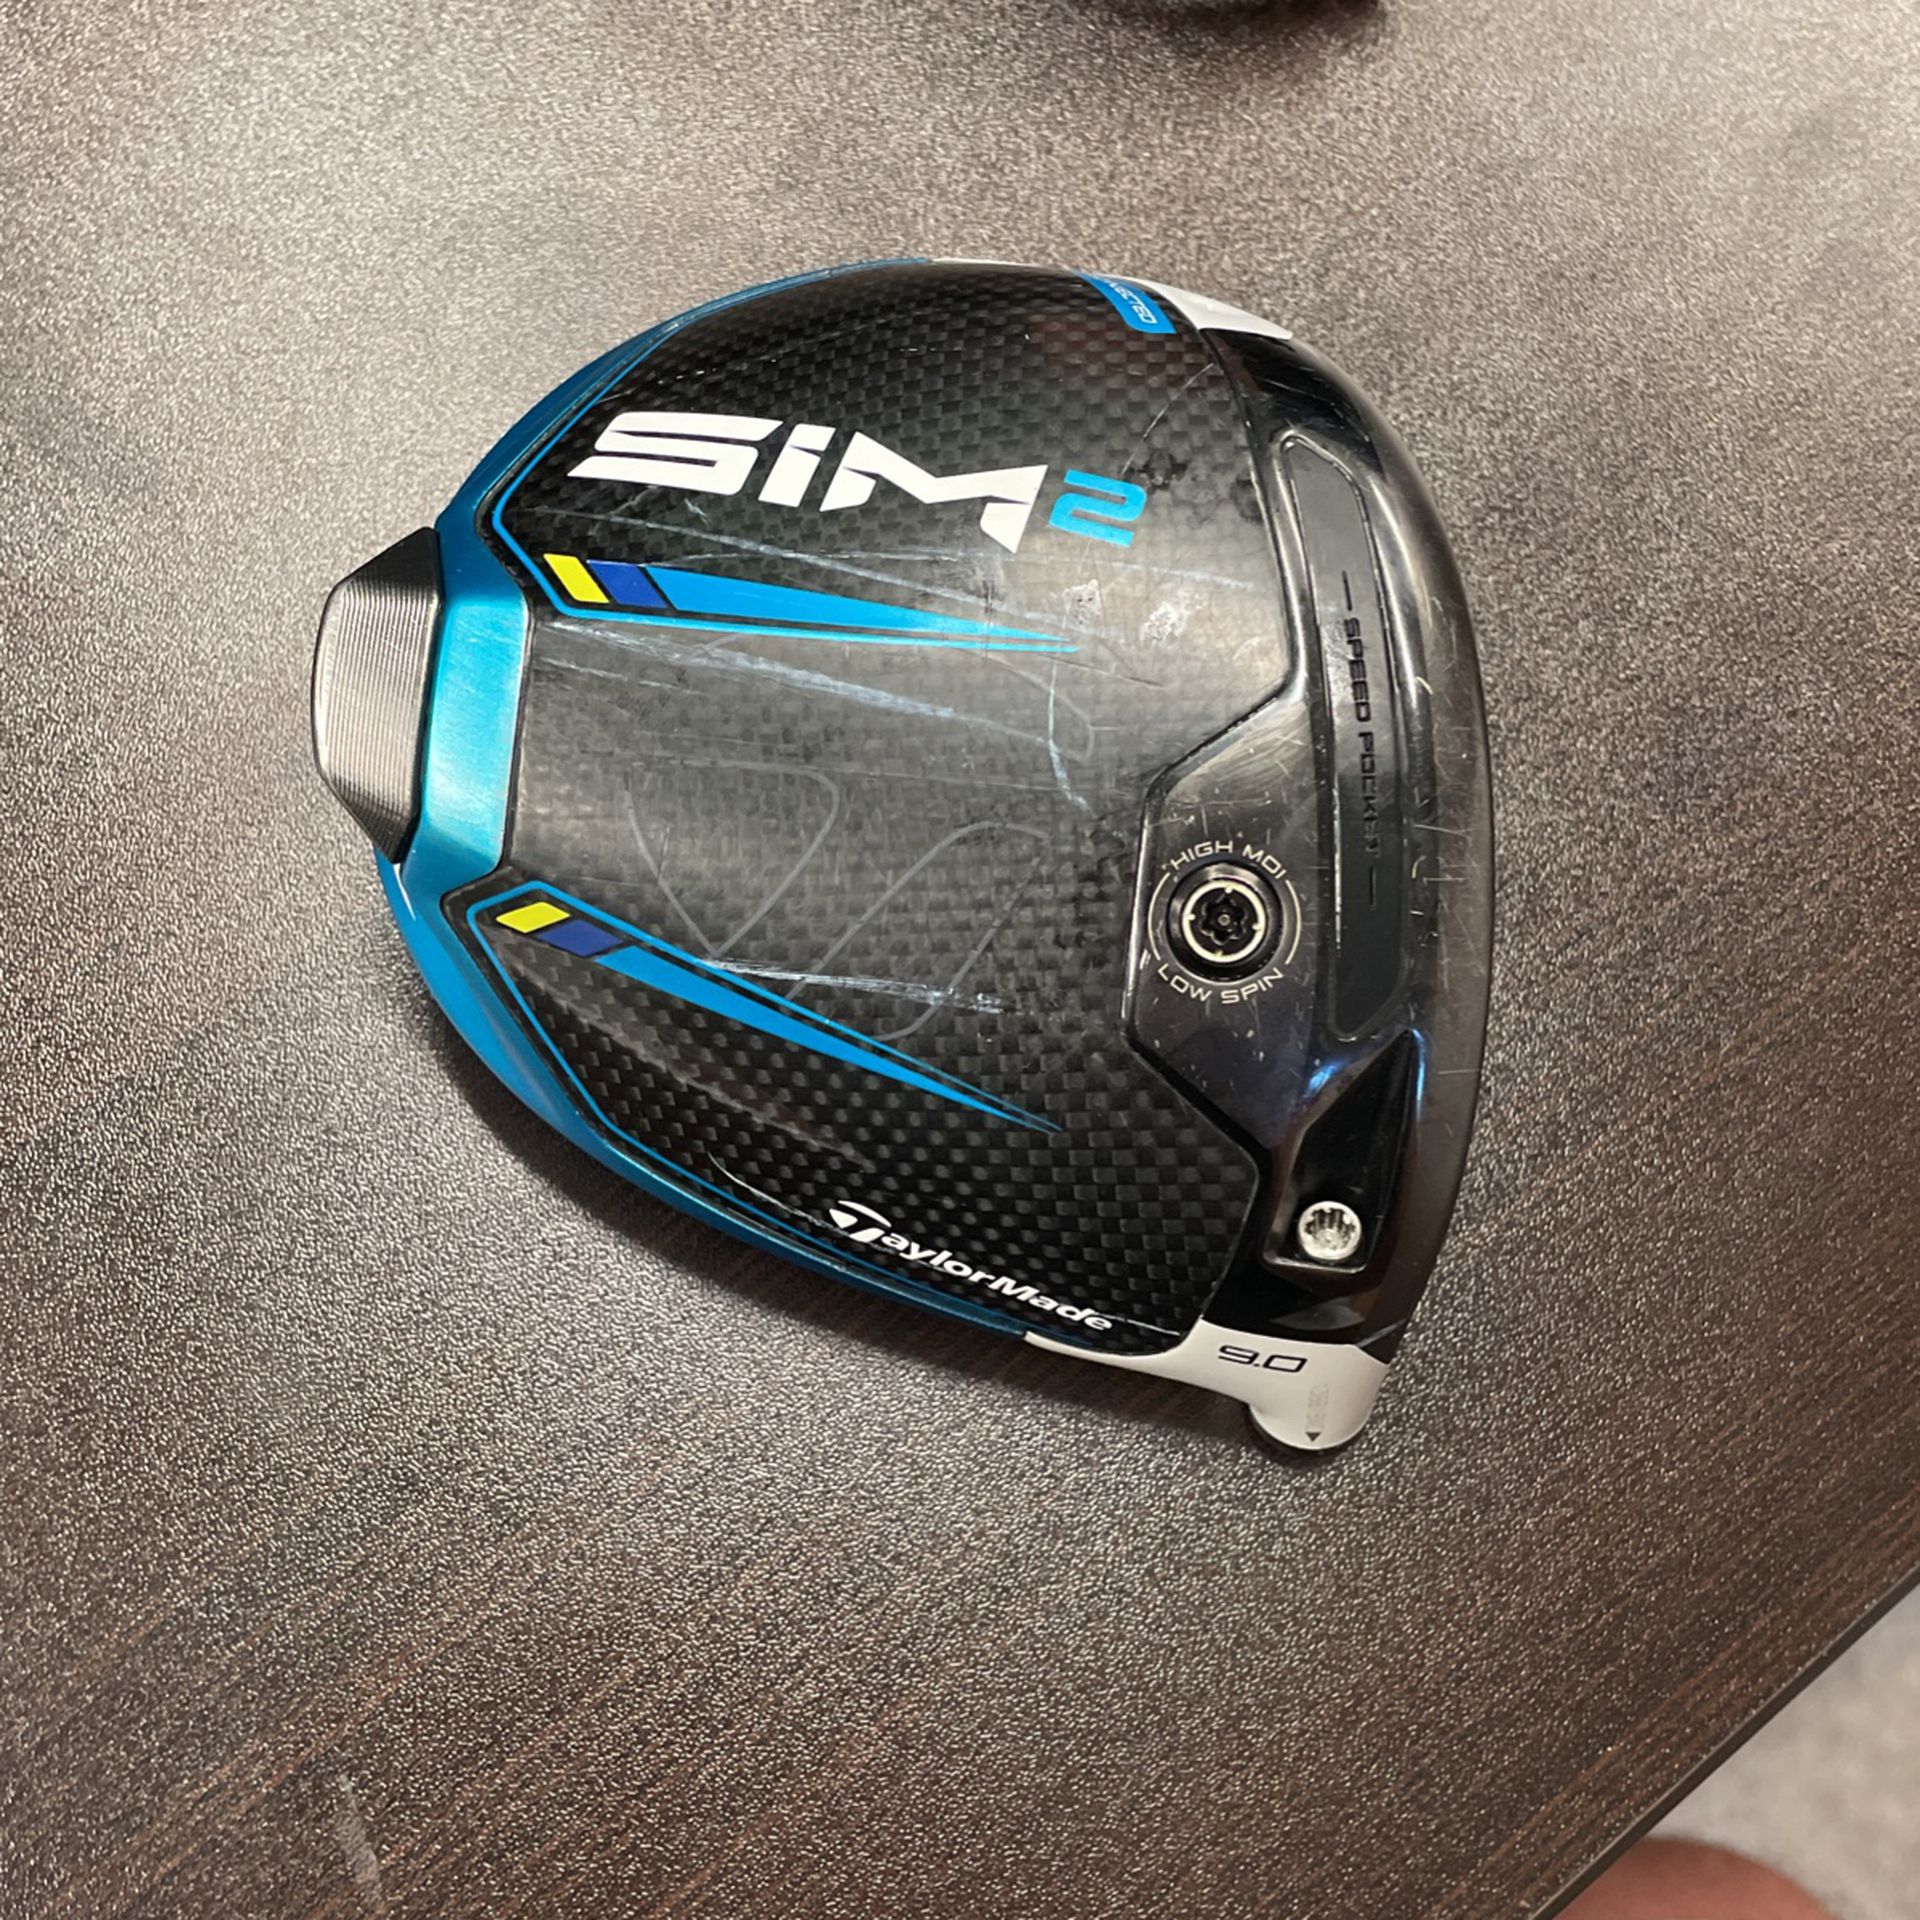 Taylormade Sim2 (driver head only)